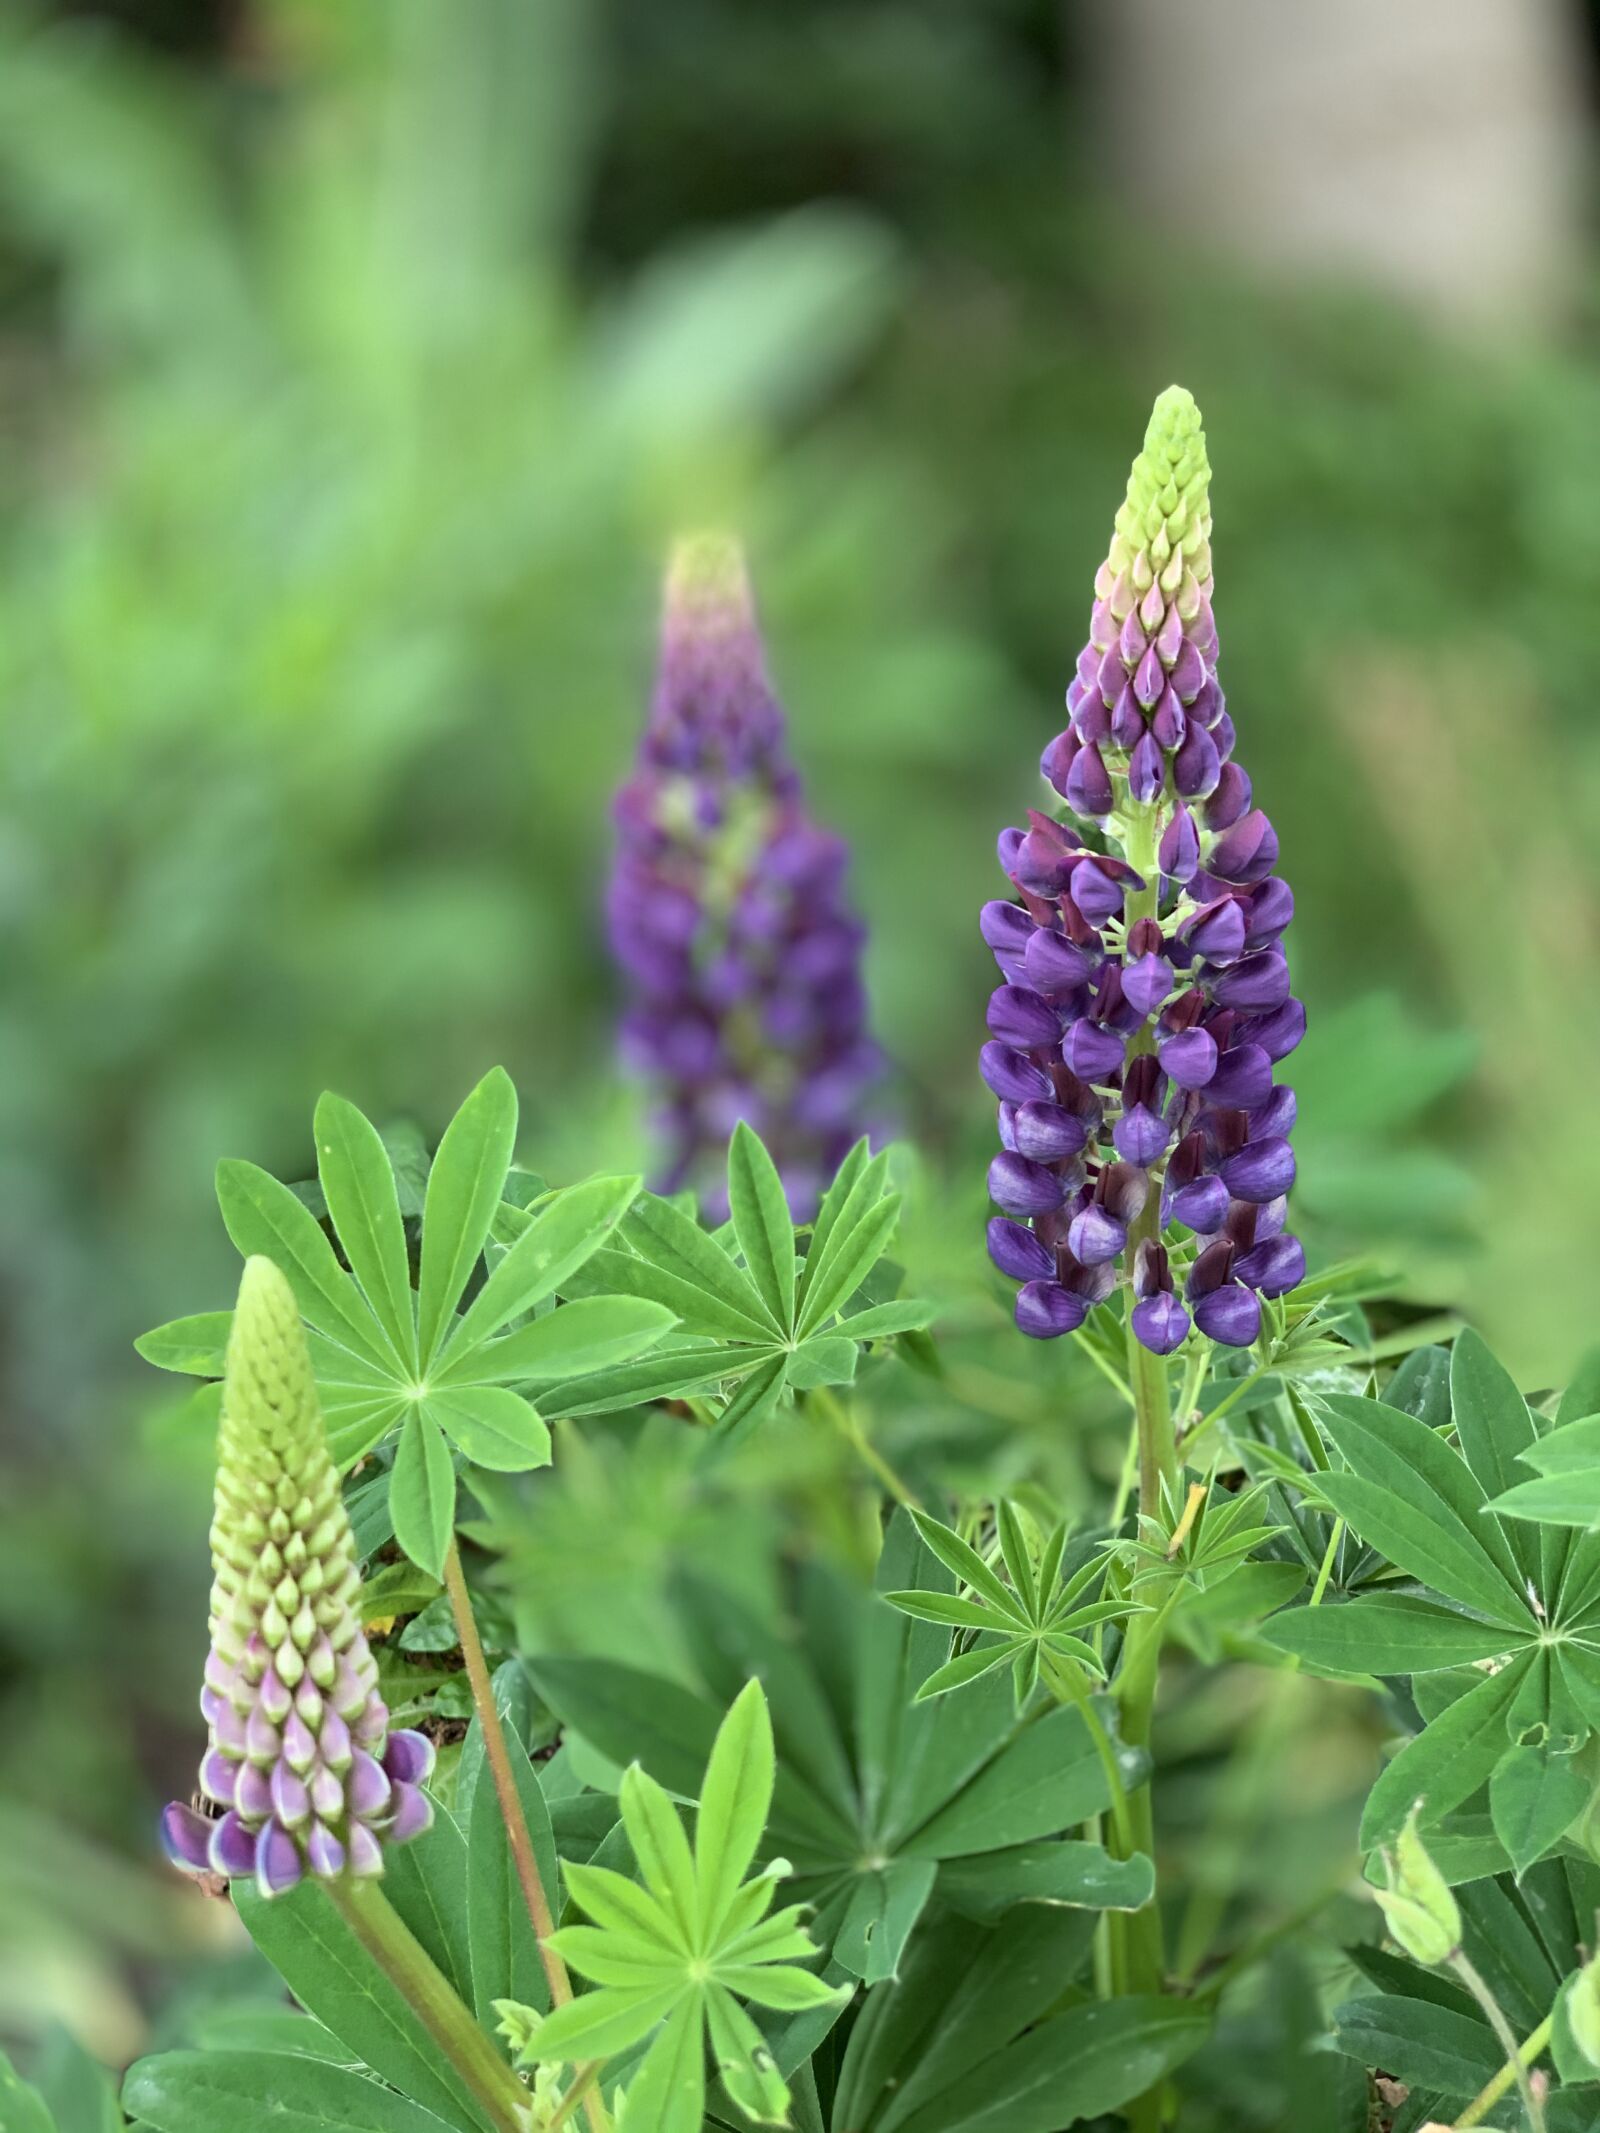 Apple iPhone XS Max + iPhone XS Max back dual camera 6mm f/2.4 sample photo. Garden, lupins, blue photography